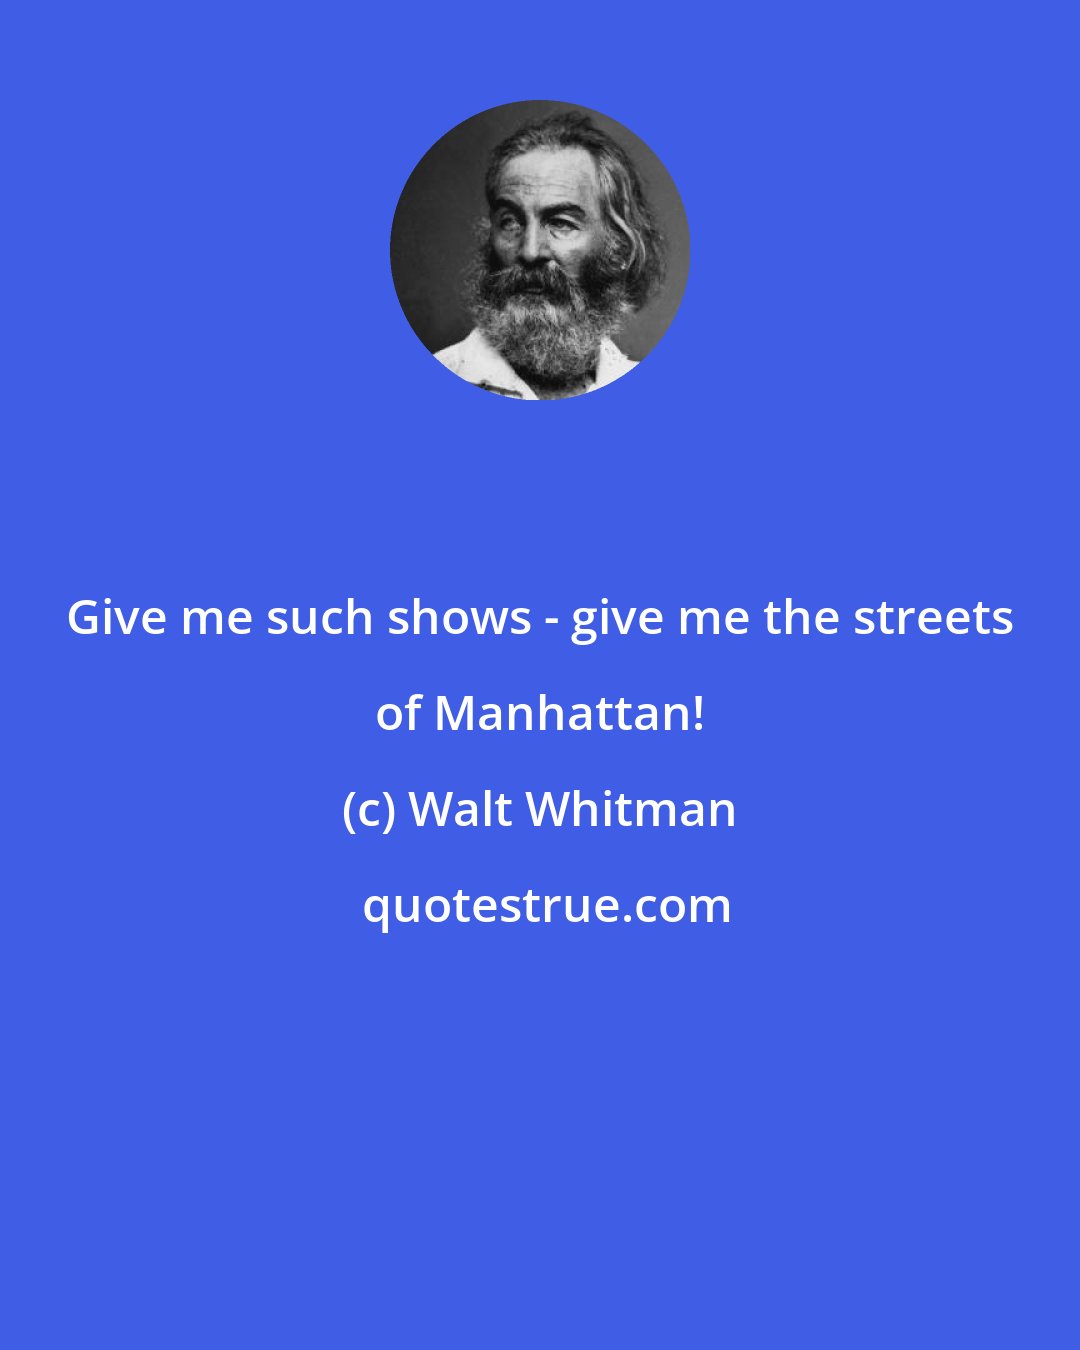 Walt Whitman: Give me such shows - give me the streets of Manhattan!